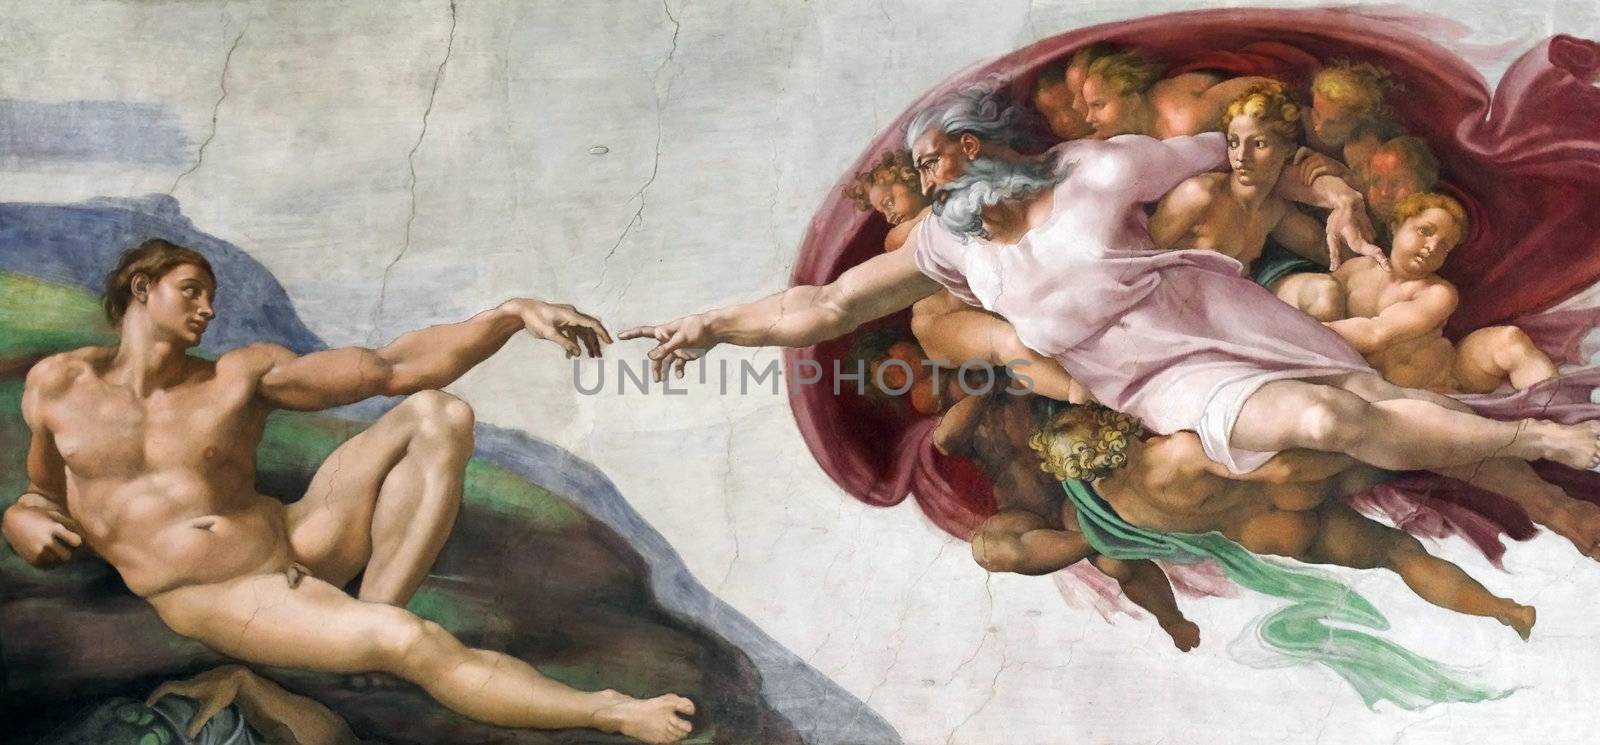 ROME, ITALY - MARCH 08: Michelangelo's masterpiece: The Creation of Adam in Sistine Chapel, Vatican Museum on March 08, 2011 in Rome, Italy